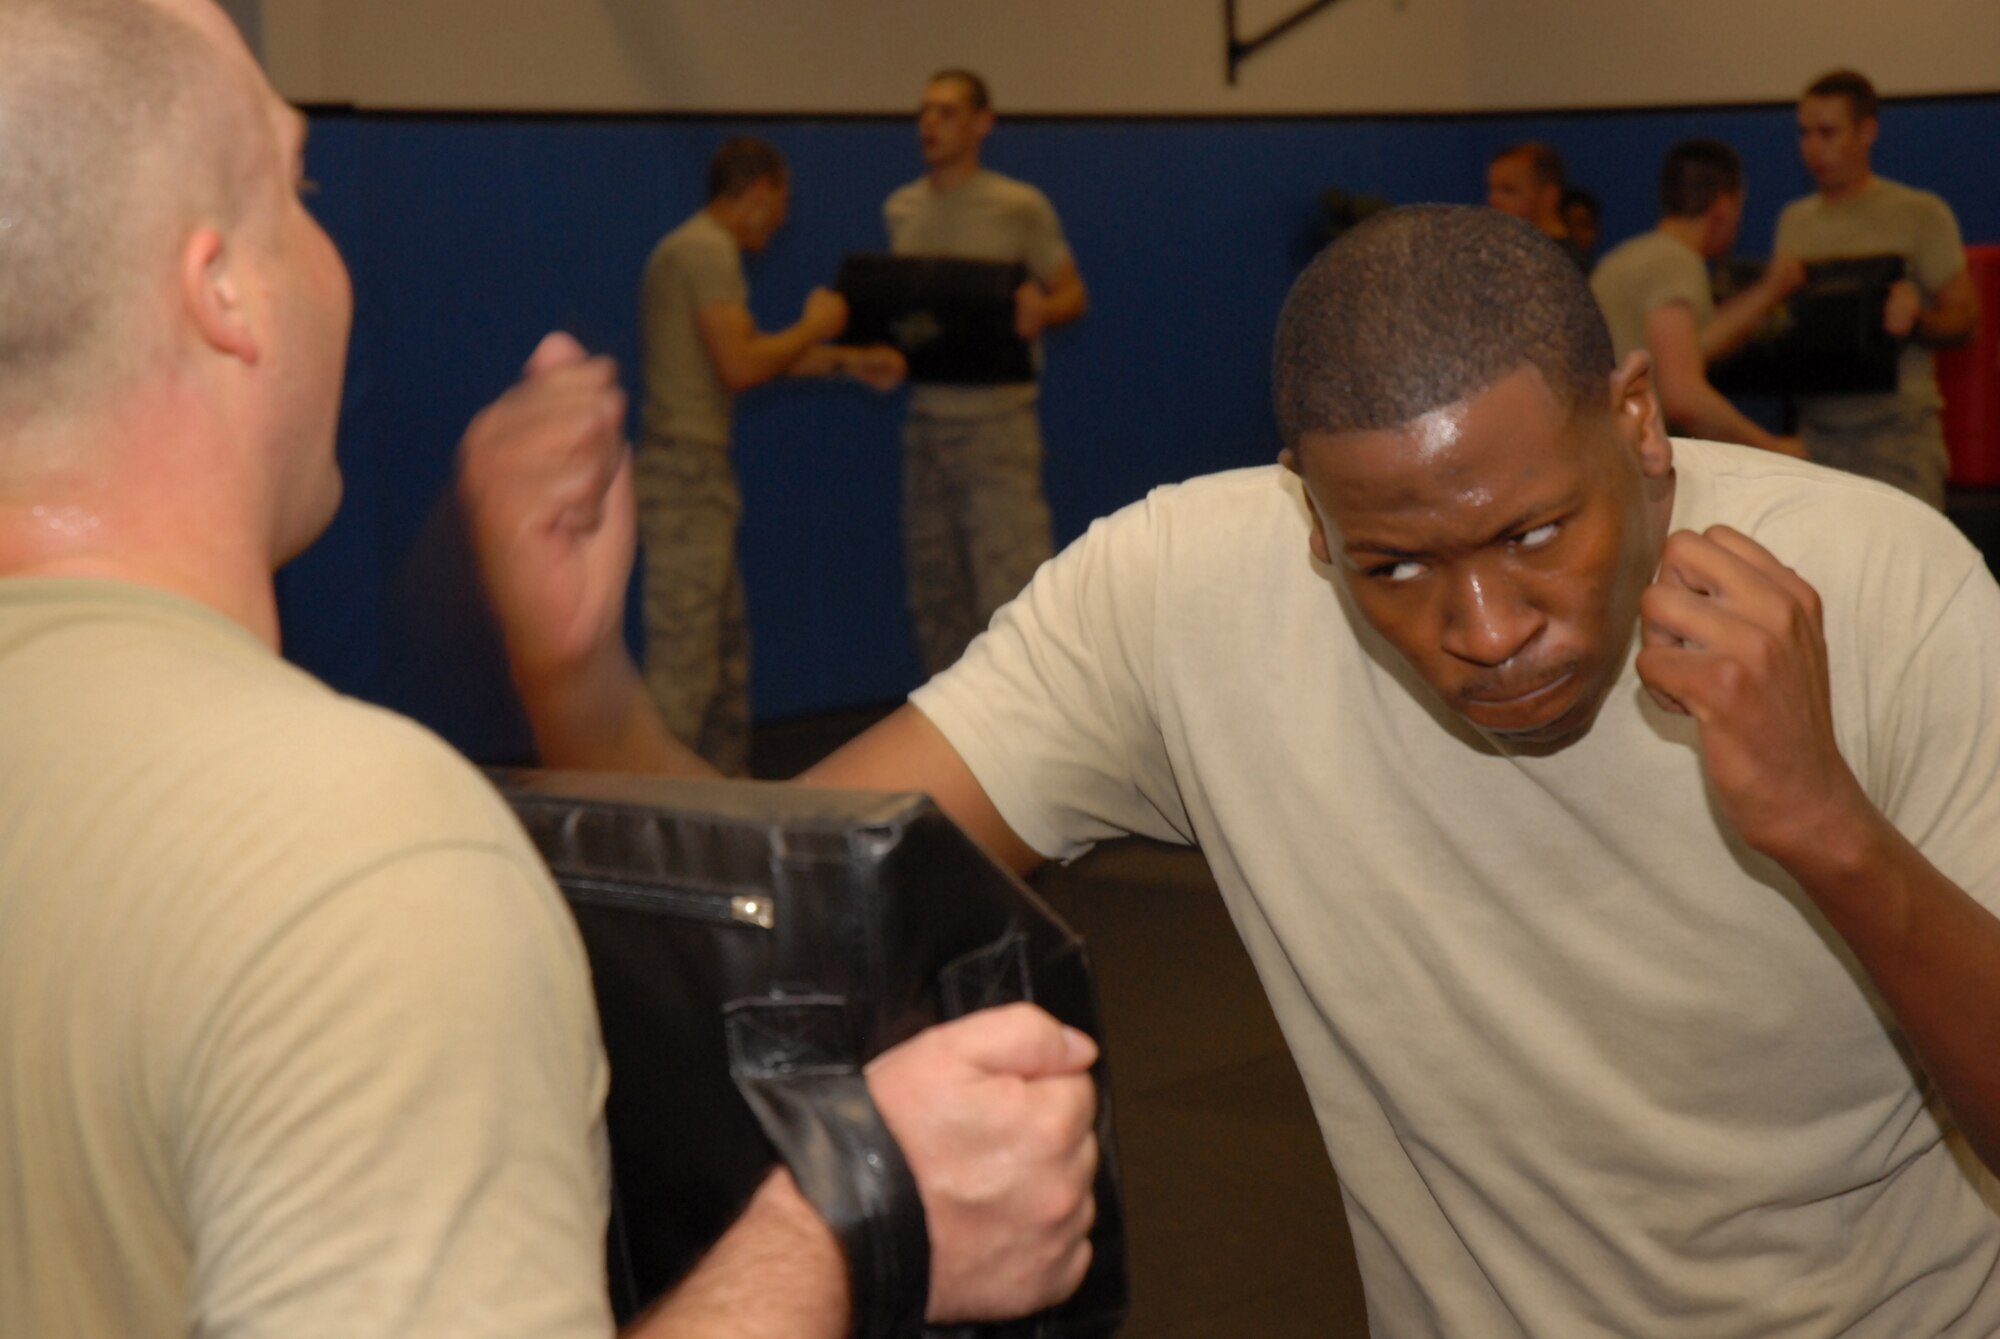 Fly-Away Security Team (FAST) students learn proper strike techniques during ground fighting training at the U.S. Air Force Expeditionary Center, Joint Base McGuire-Dix-Lakehurst, N.J. on June 4, 2009. FAST members provide airfield assessment and aircraft security for Air Force Central Command  transient resources. (U.S. Air Force Photo/Tech. Sgt. Paul R. Evans)